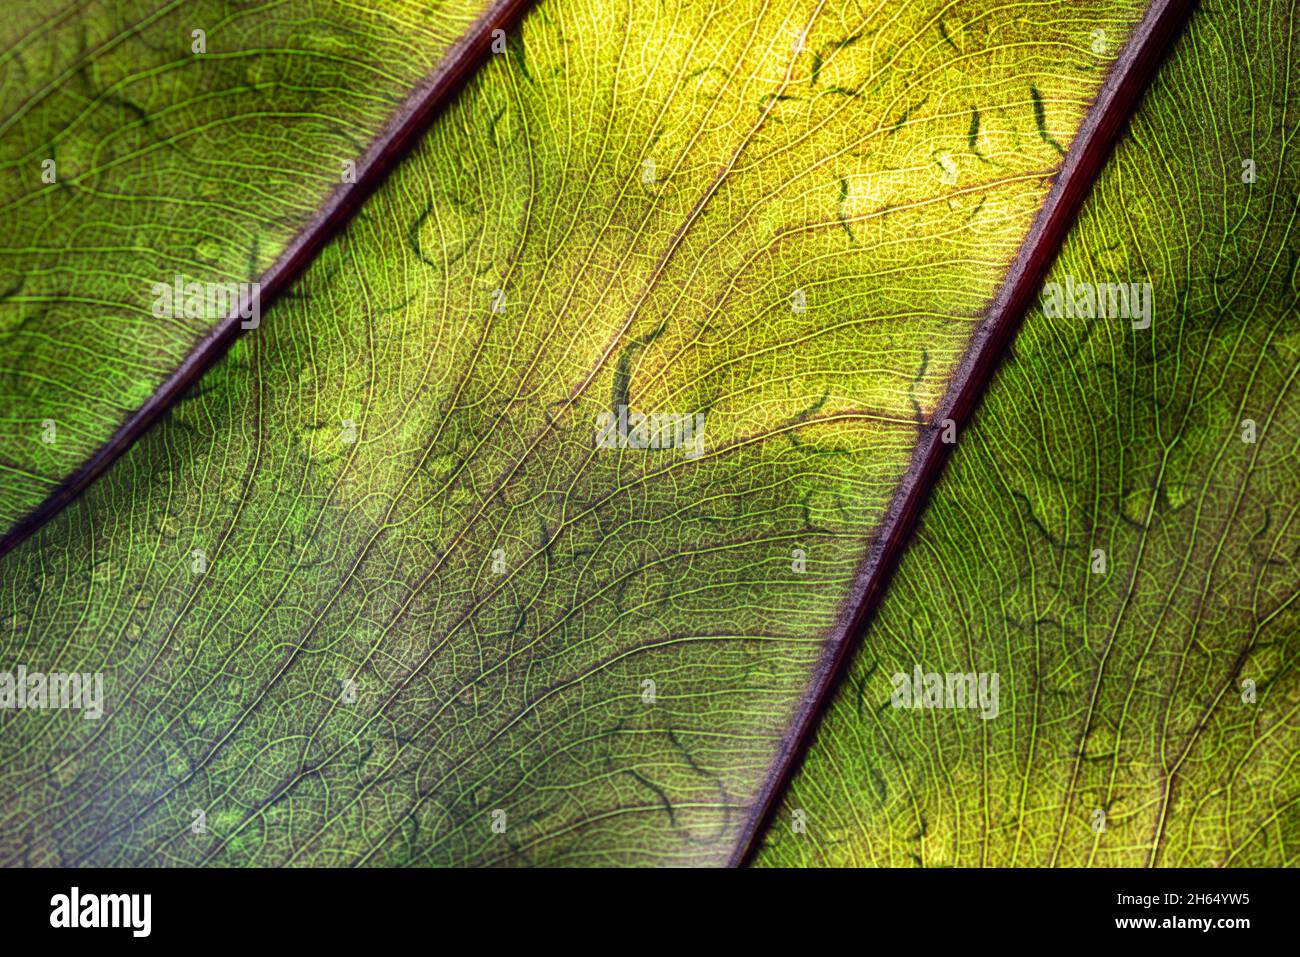 Branches of capillaries in the leaf backlit by natural light. Stock Photo